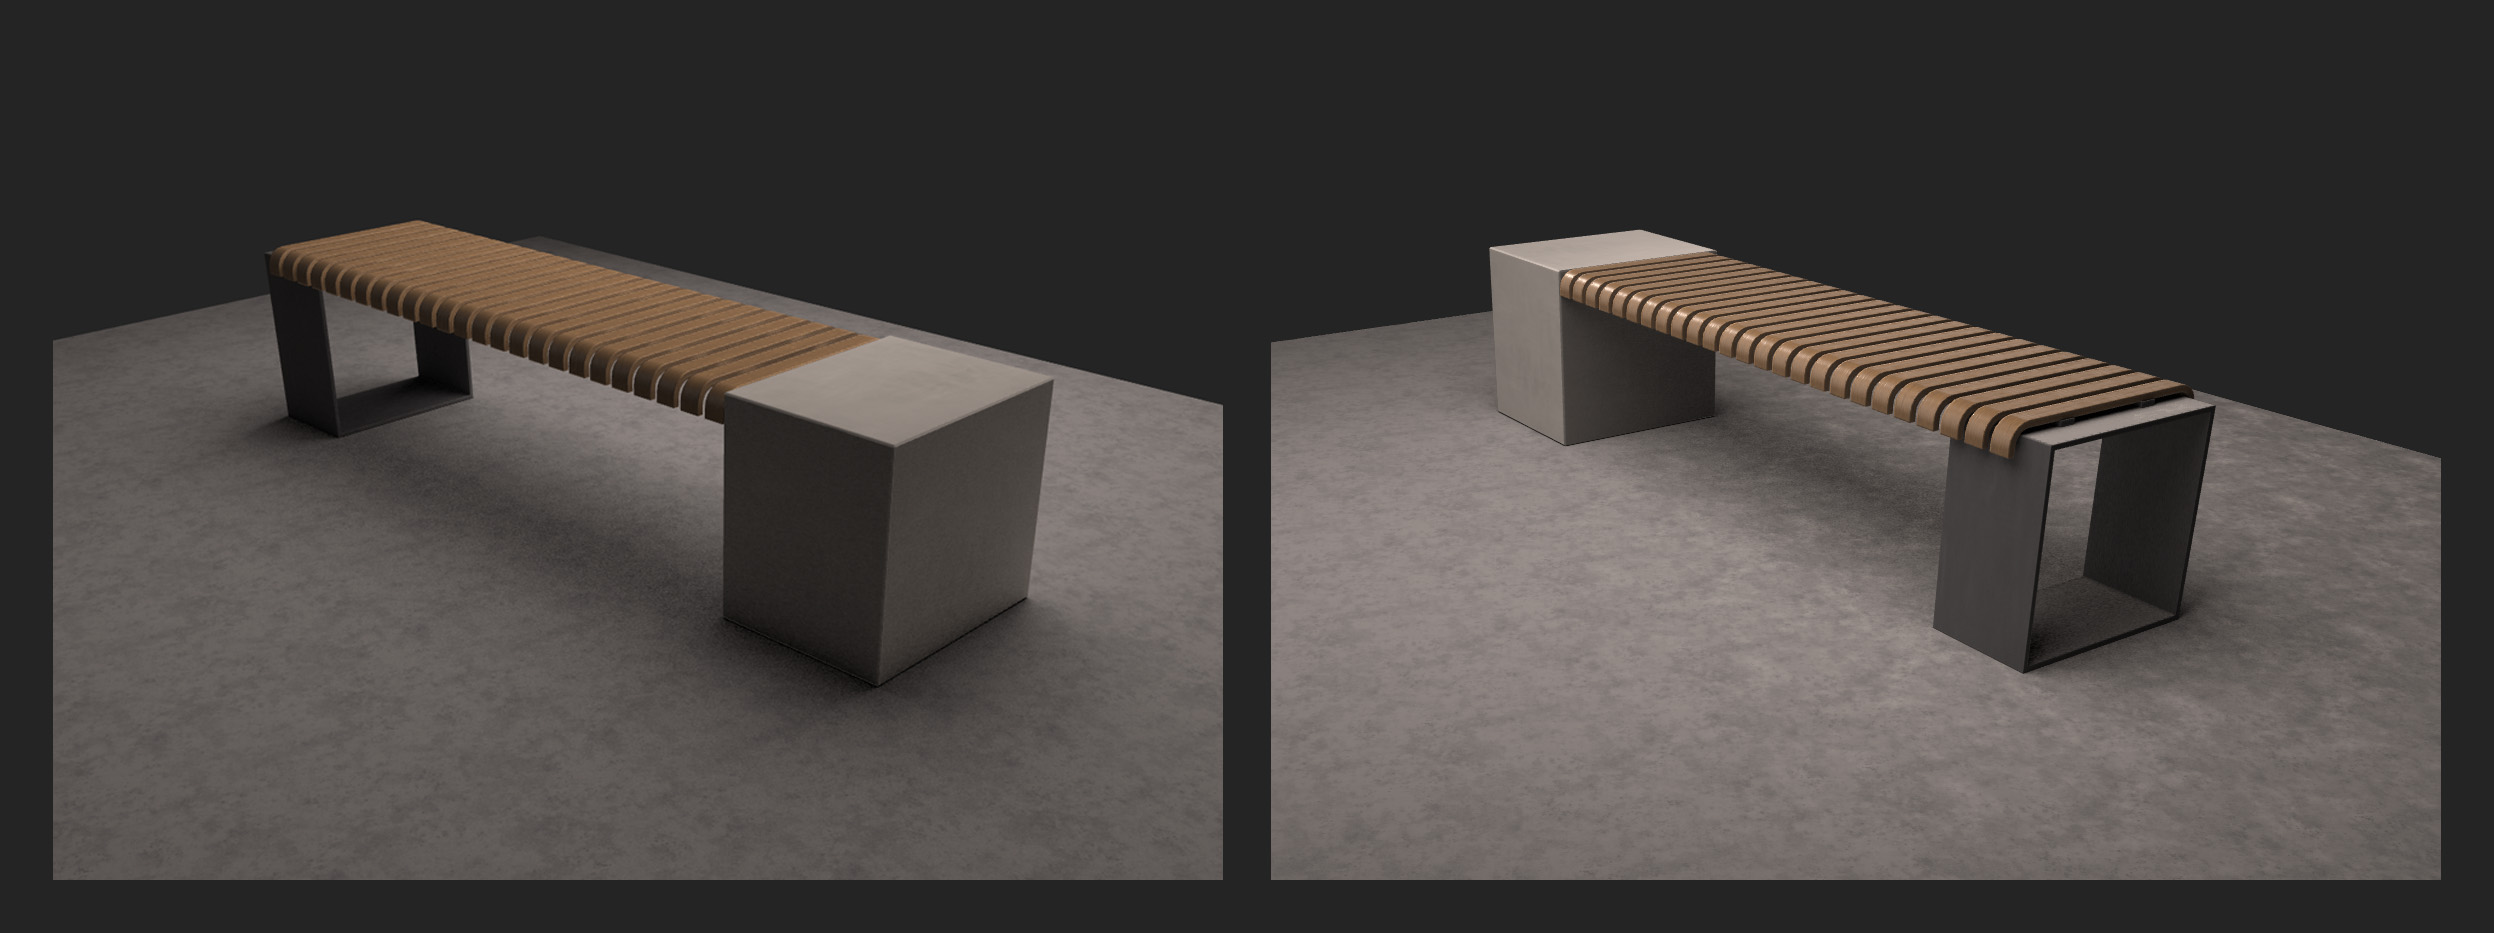 Final renders of the bench on a concrete ground plane with soft shadows and bounced light on both assets shown from the rear on the left and the front on the right